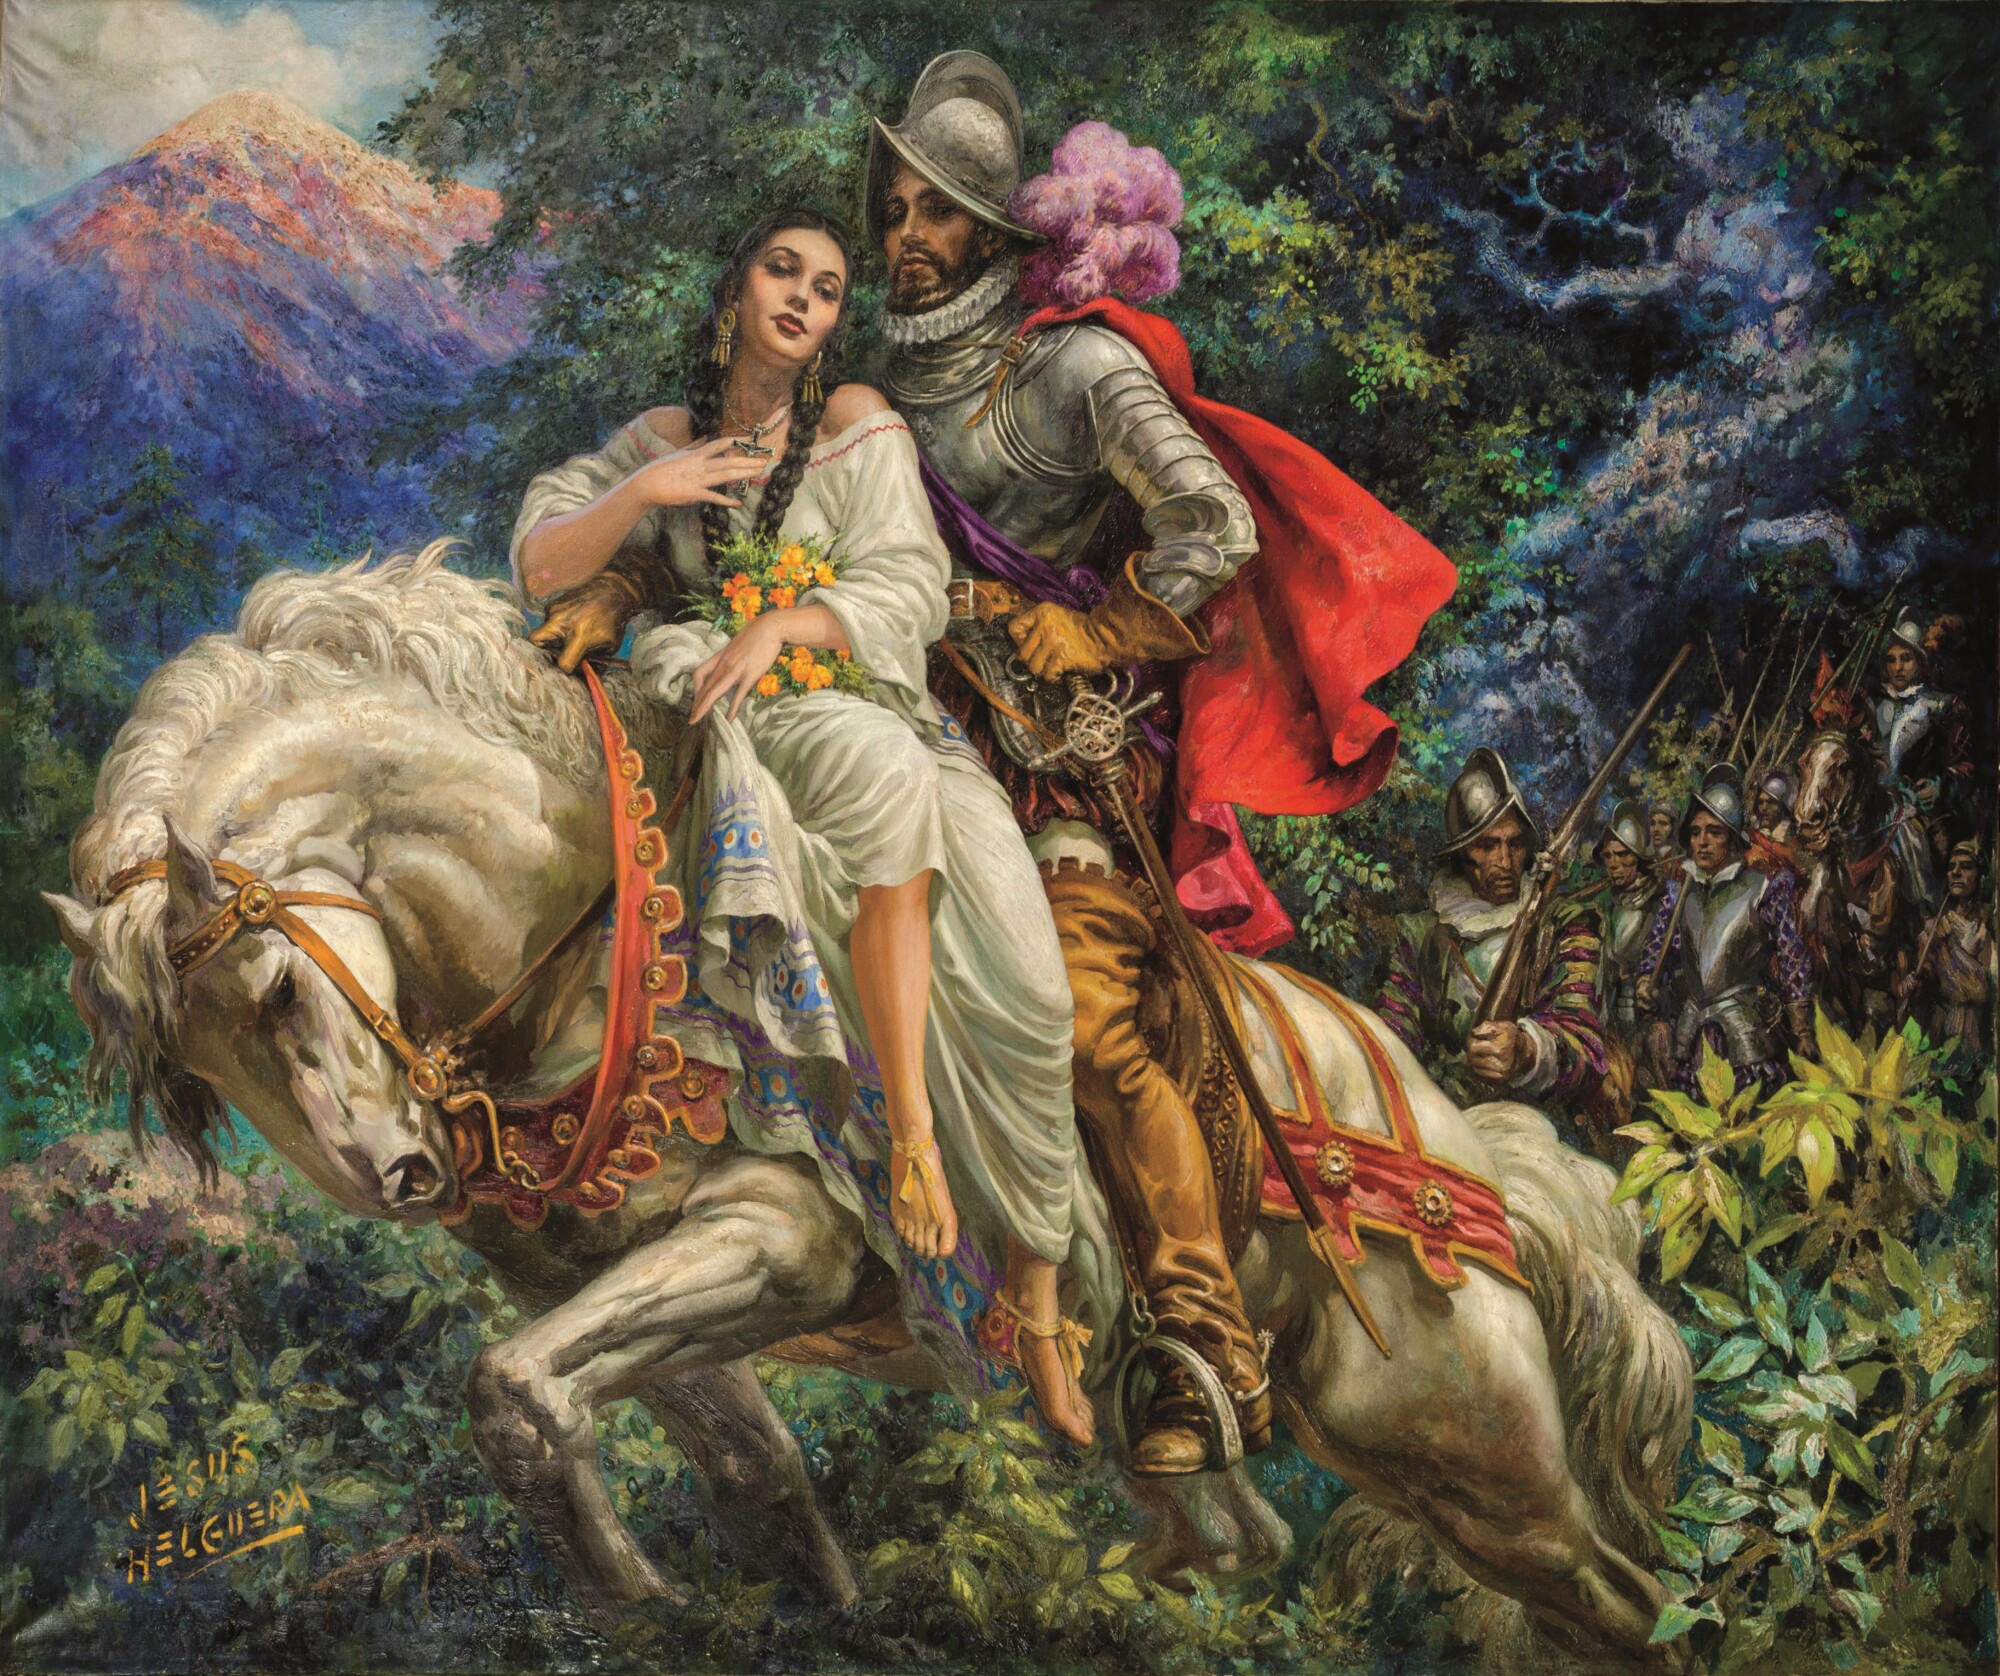 A painting shows a woman in white Indigenous dress on a white horse in the arms of a conquistador